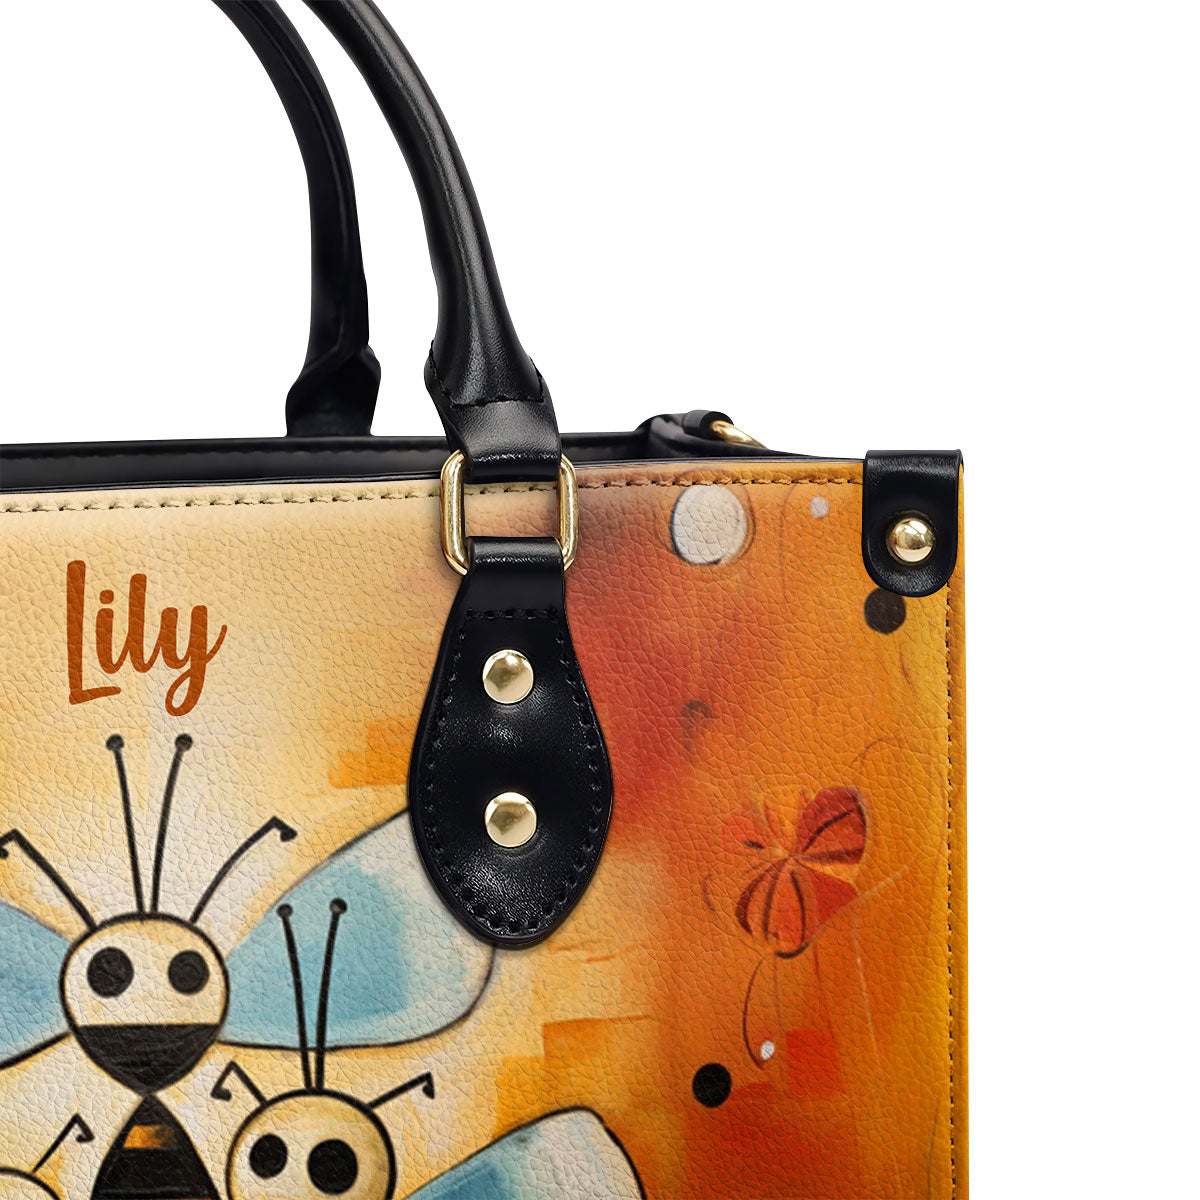 3 Bees - Personalized Leather Handbag MS-NH1632